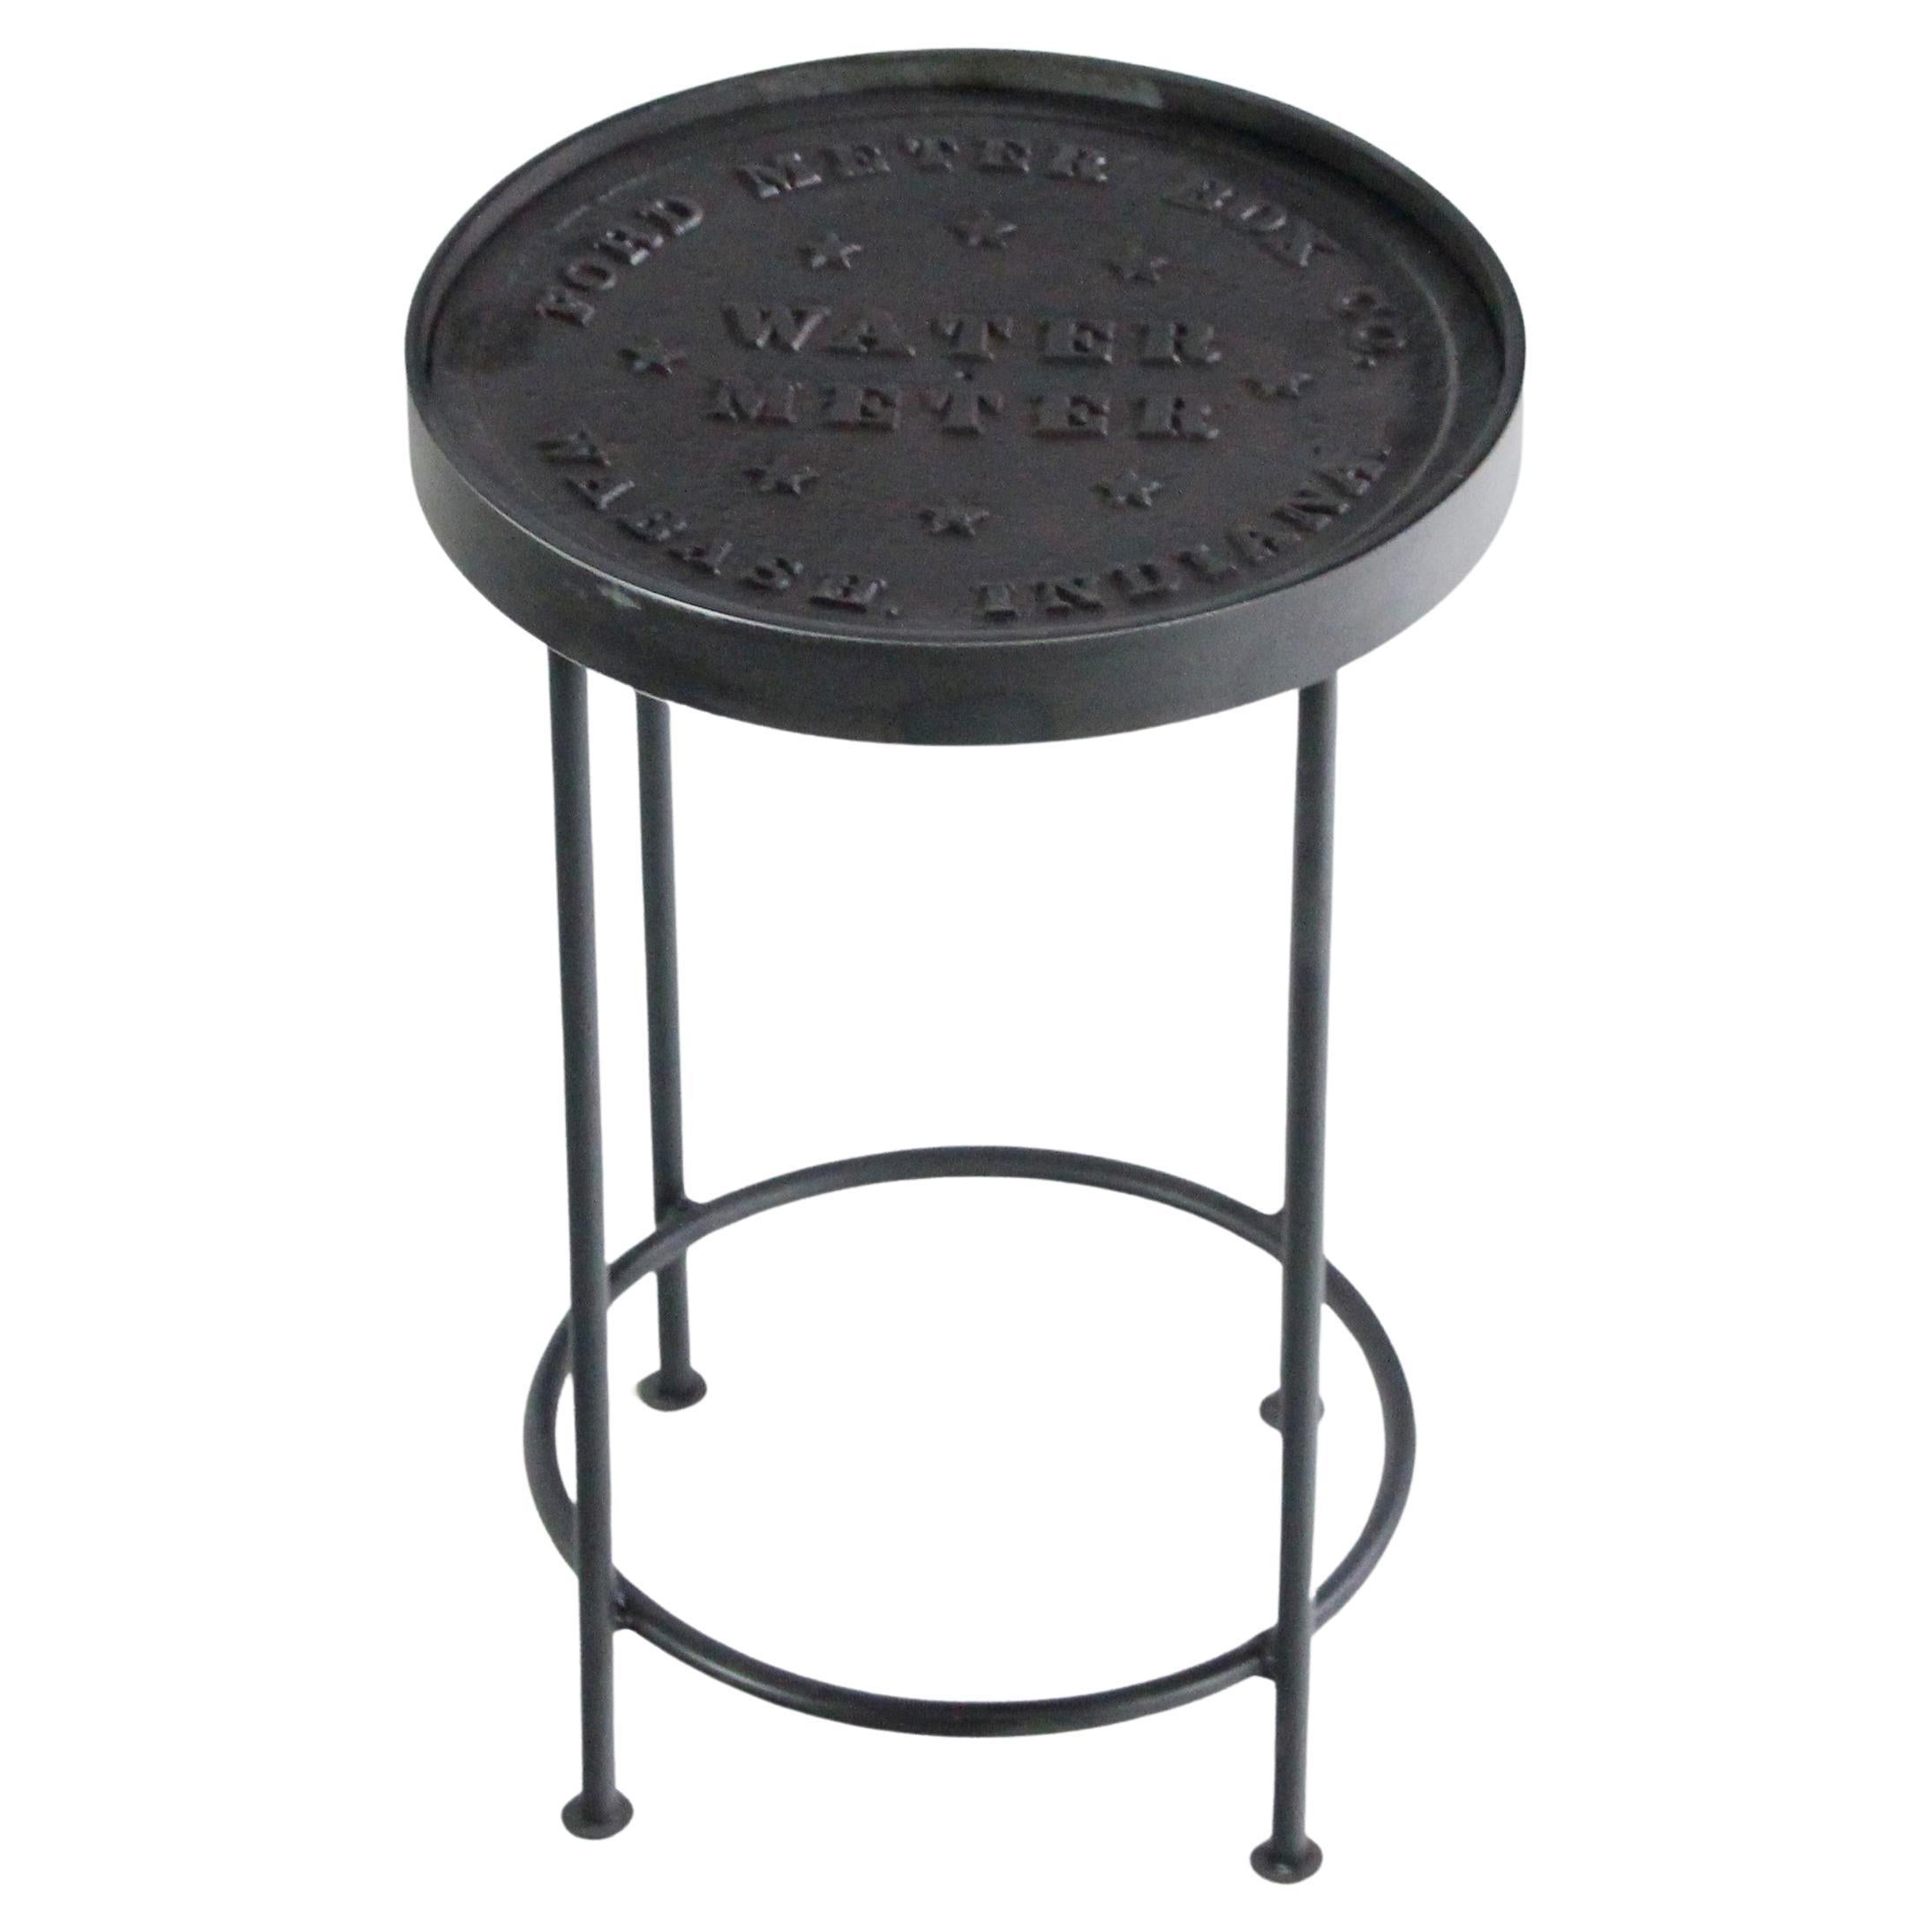 Cast Iron Water Meter Side or Telephone Table Planter Round